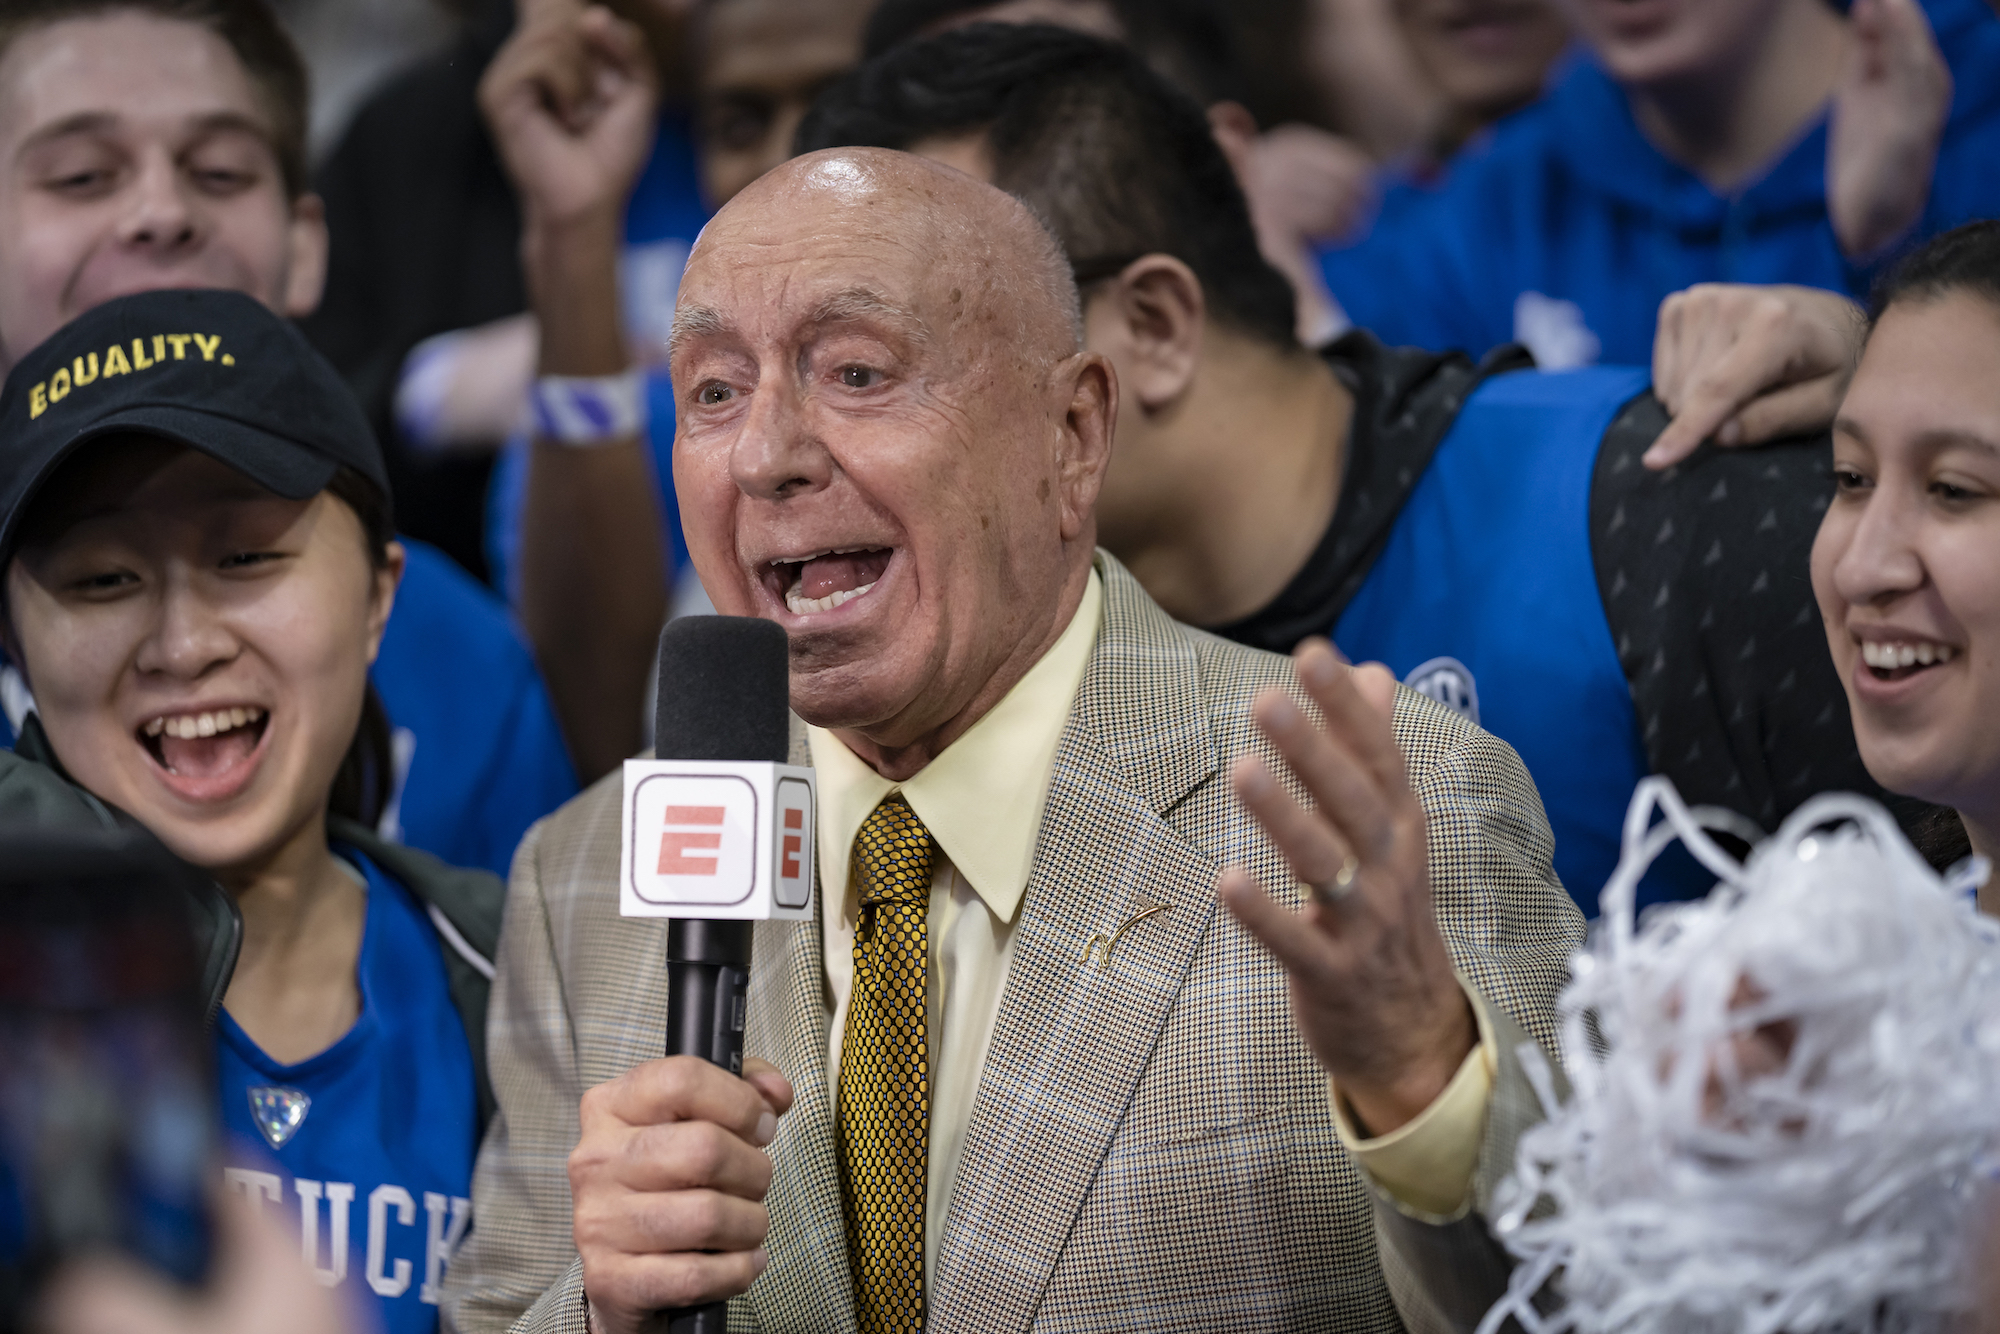 Dick Vitale's iconic ESPN career was almost cut short after some cruel criticism from a viewer.